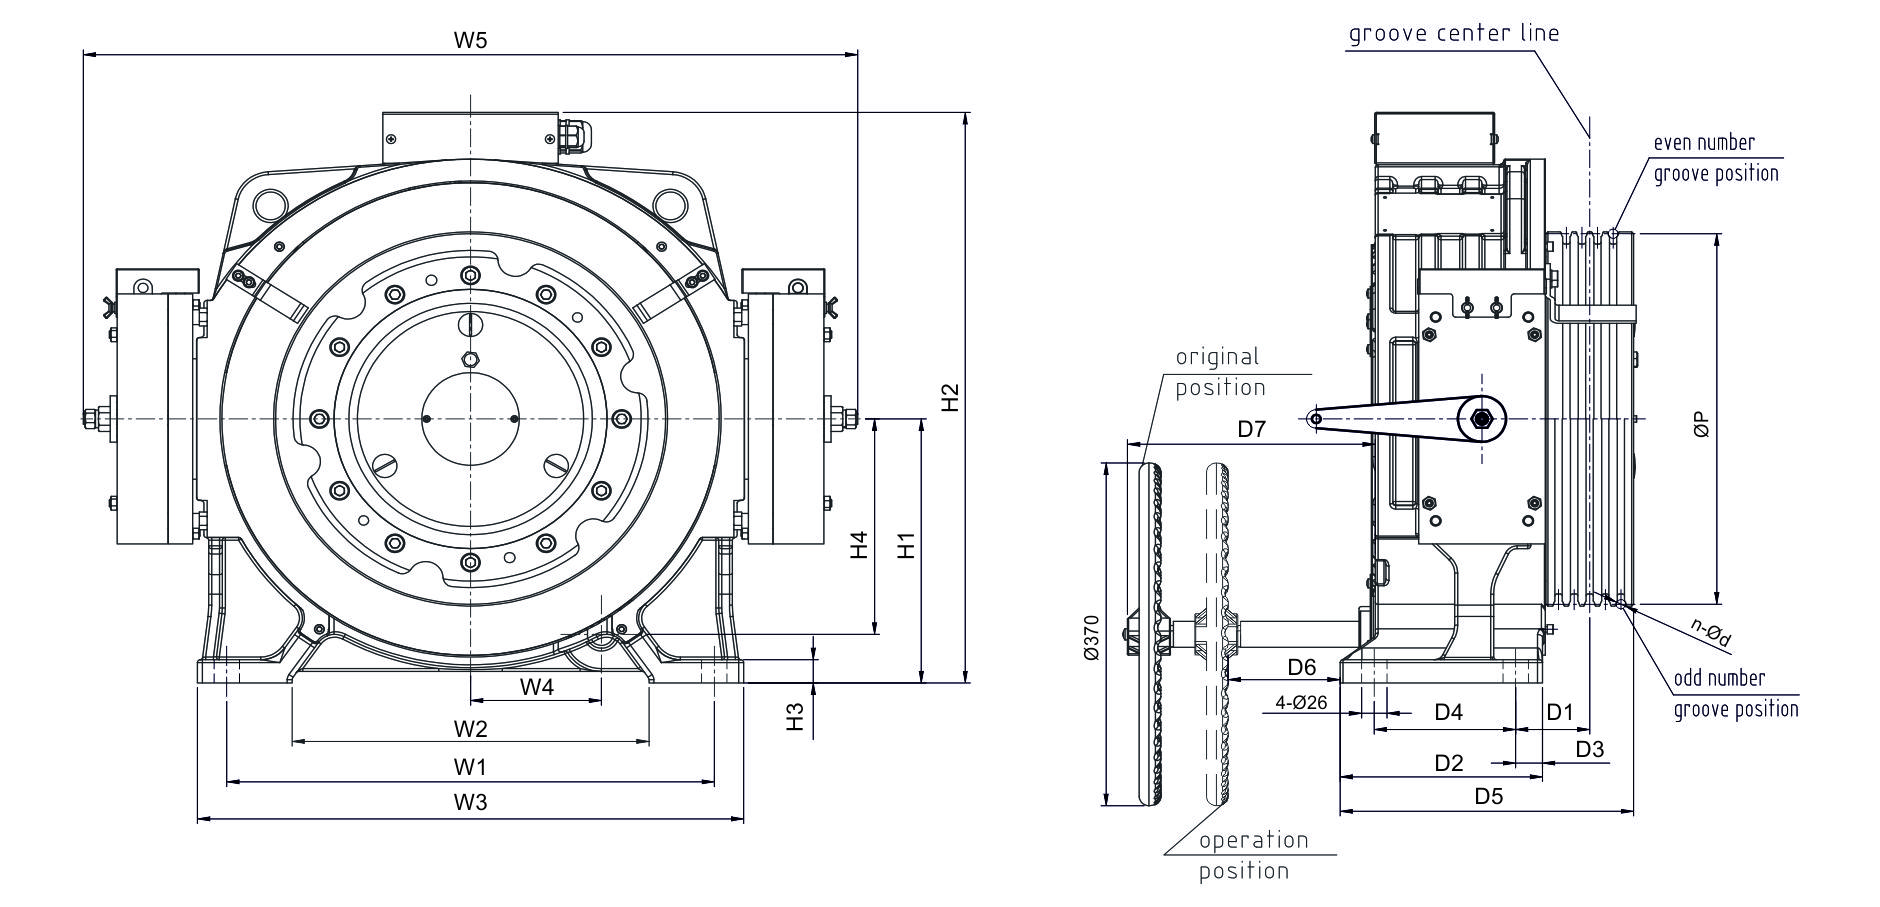 Drawing for Elevator Gearless Traction Machine withcapacity 408 kg- 1150 kg